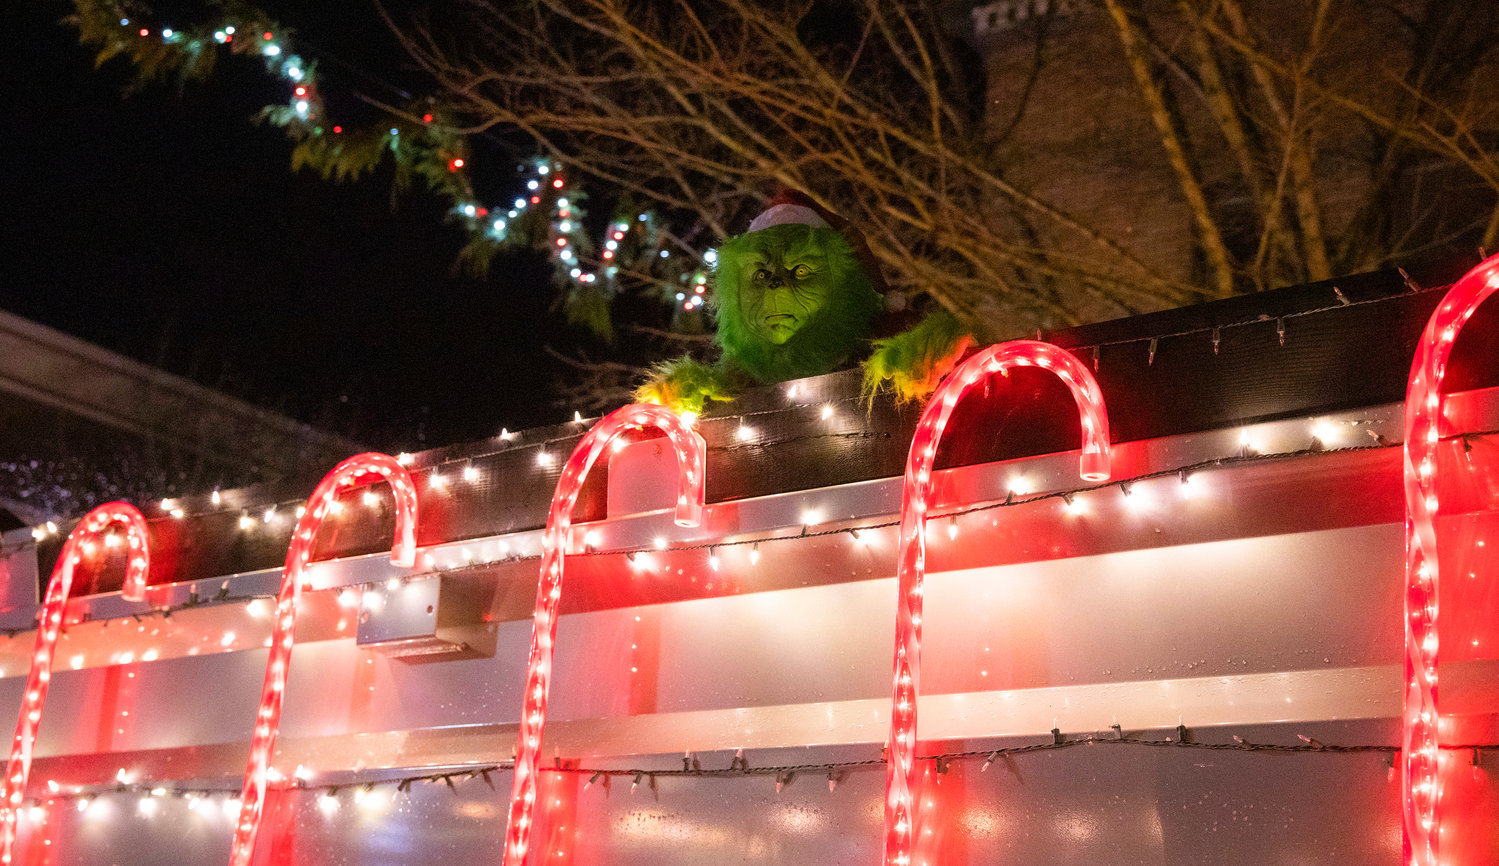 The Grinch peers down from a float during the Lighted Tractor Parade Saturday night in downtown Centralia.